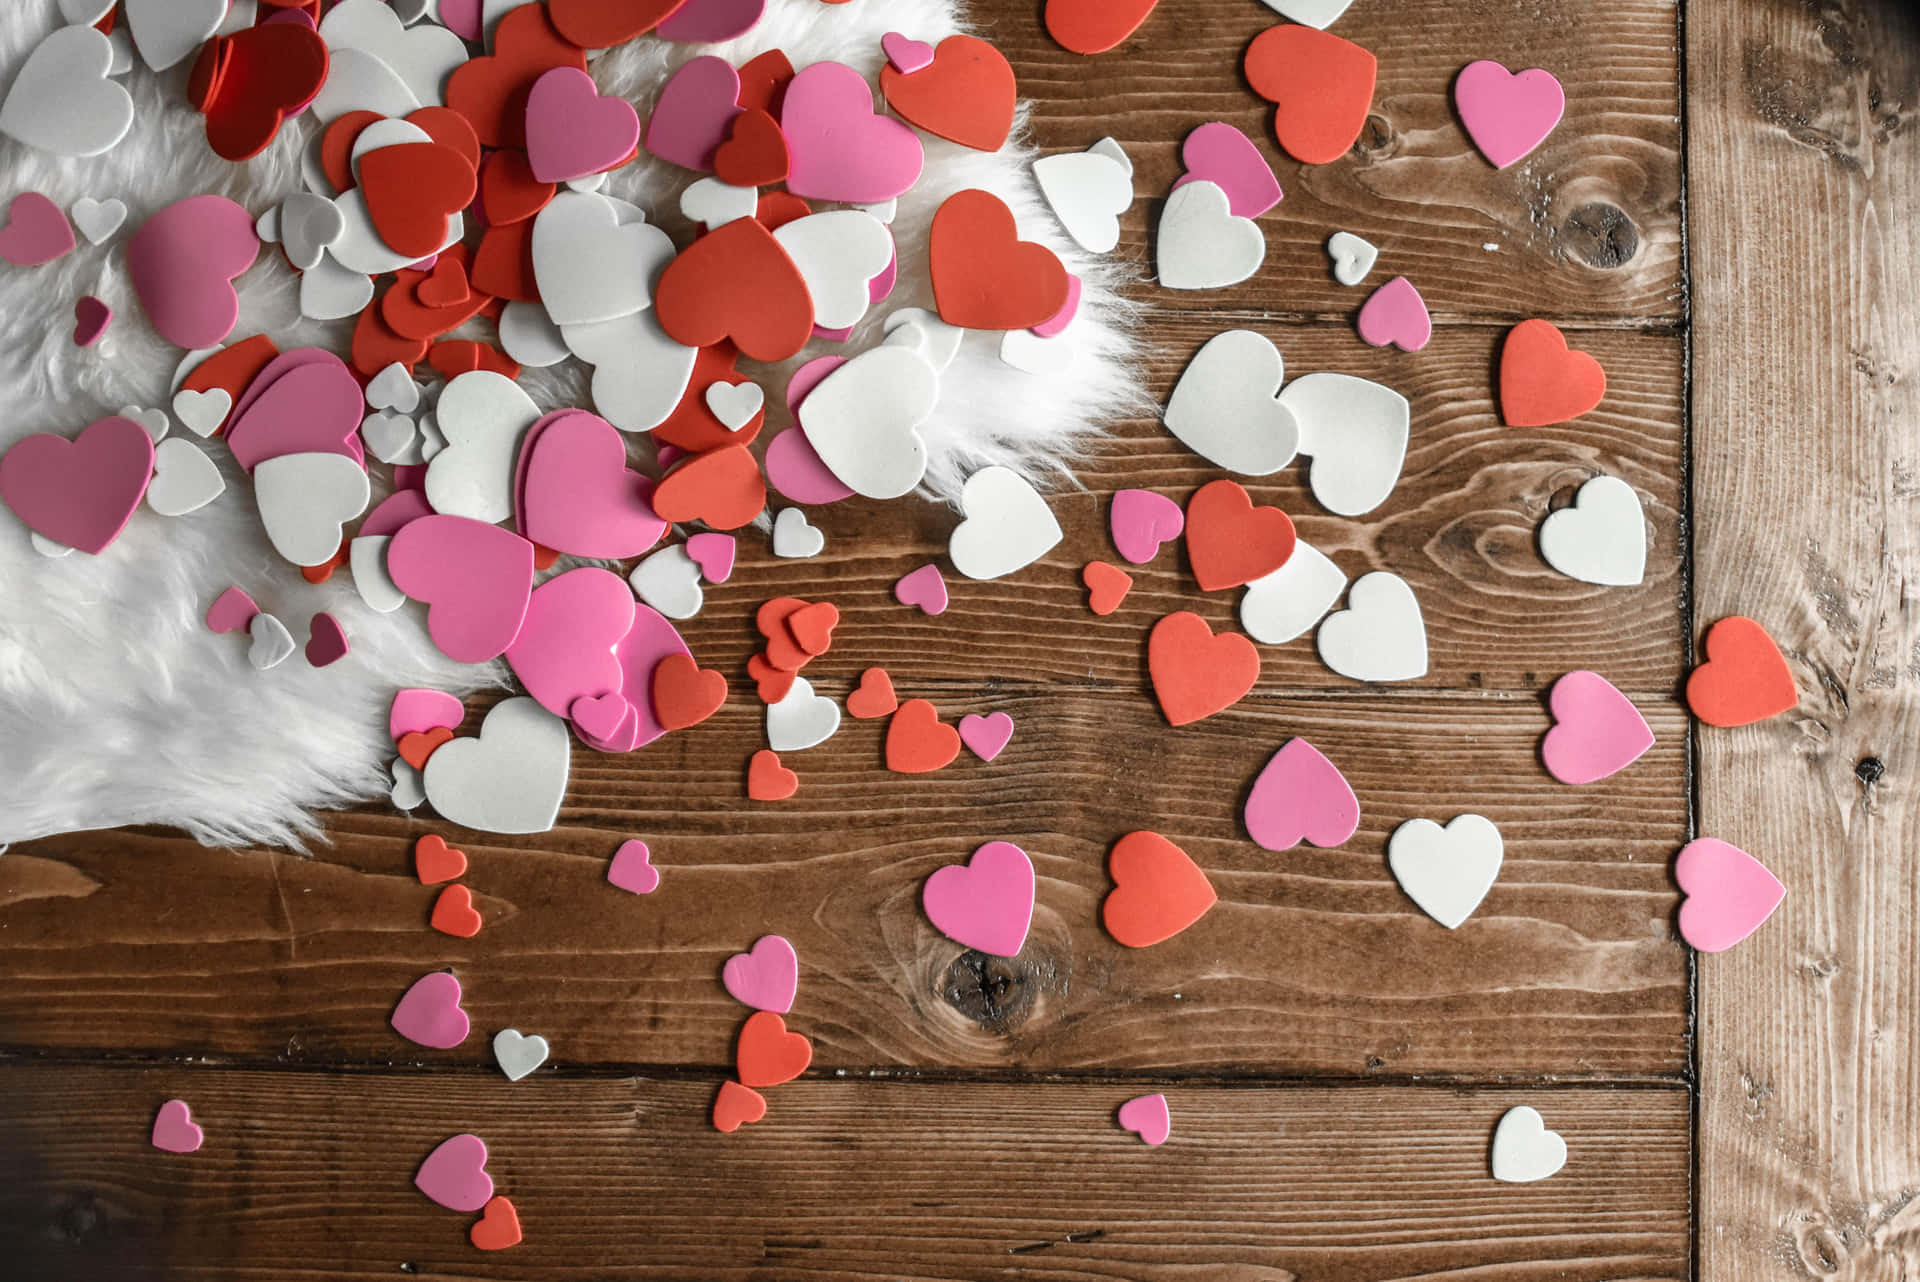 Celebrate Rustic Valentine's Day with Love Wallpaper